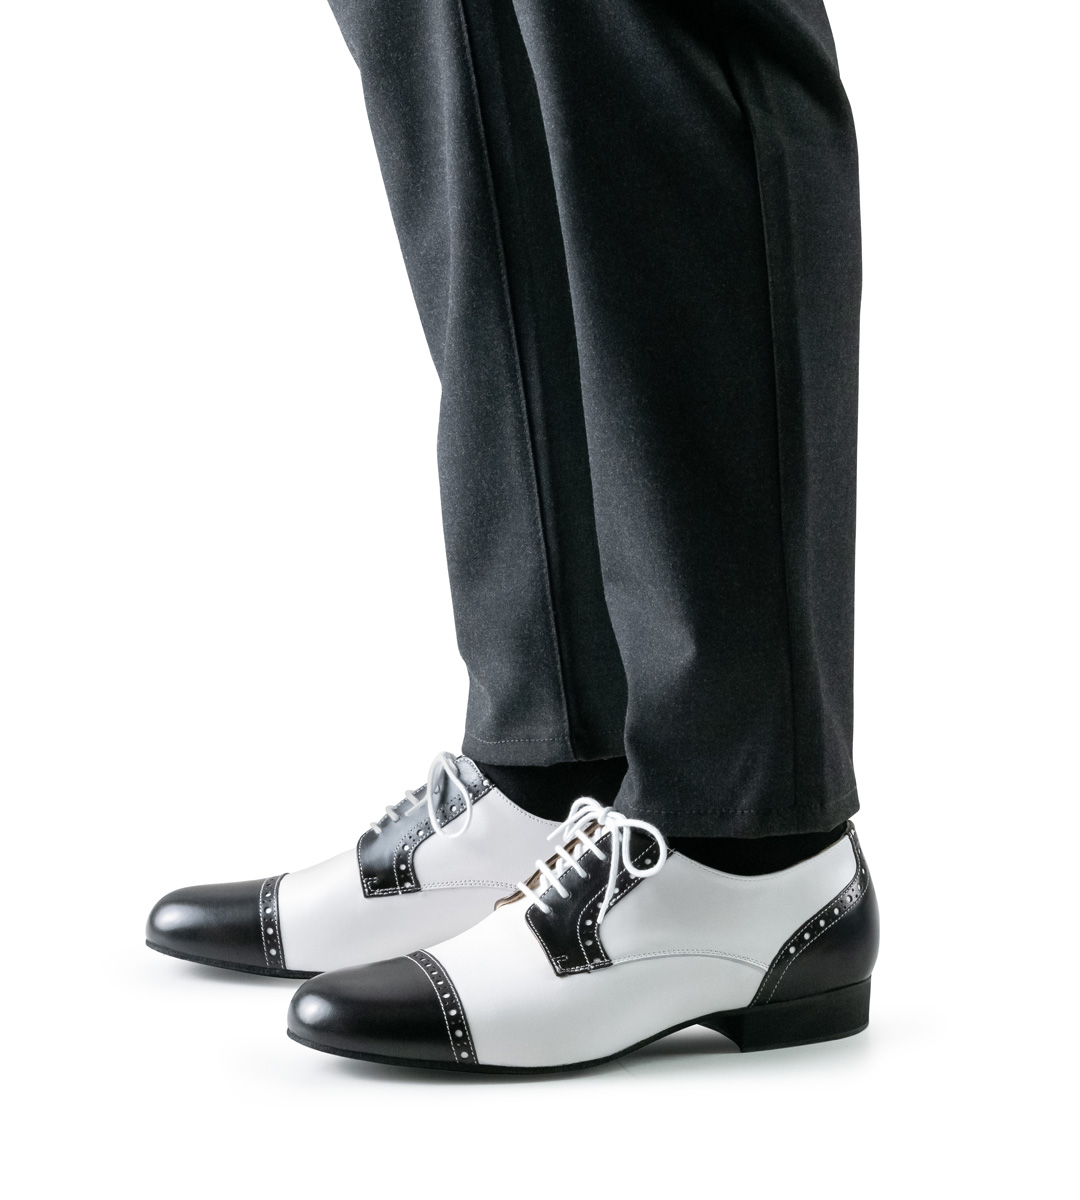 2 cm high Werner Kern men's dance shoe in combination with black trousers